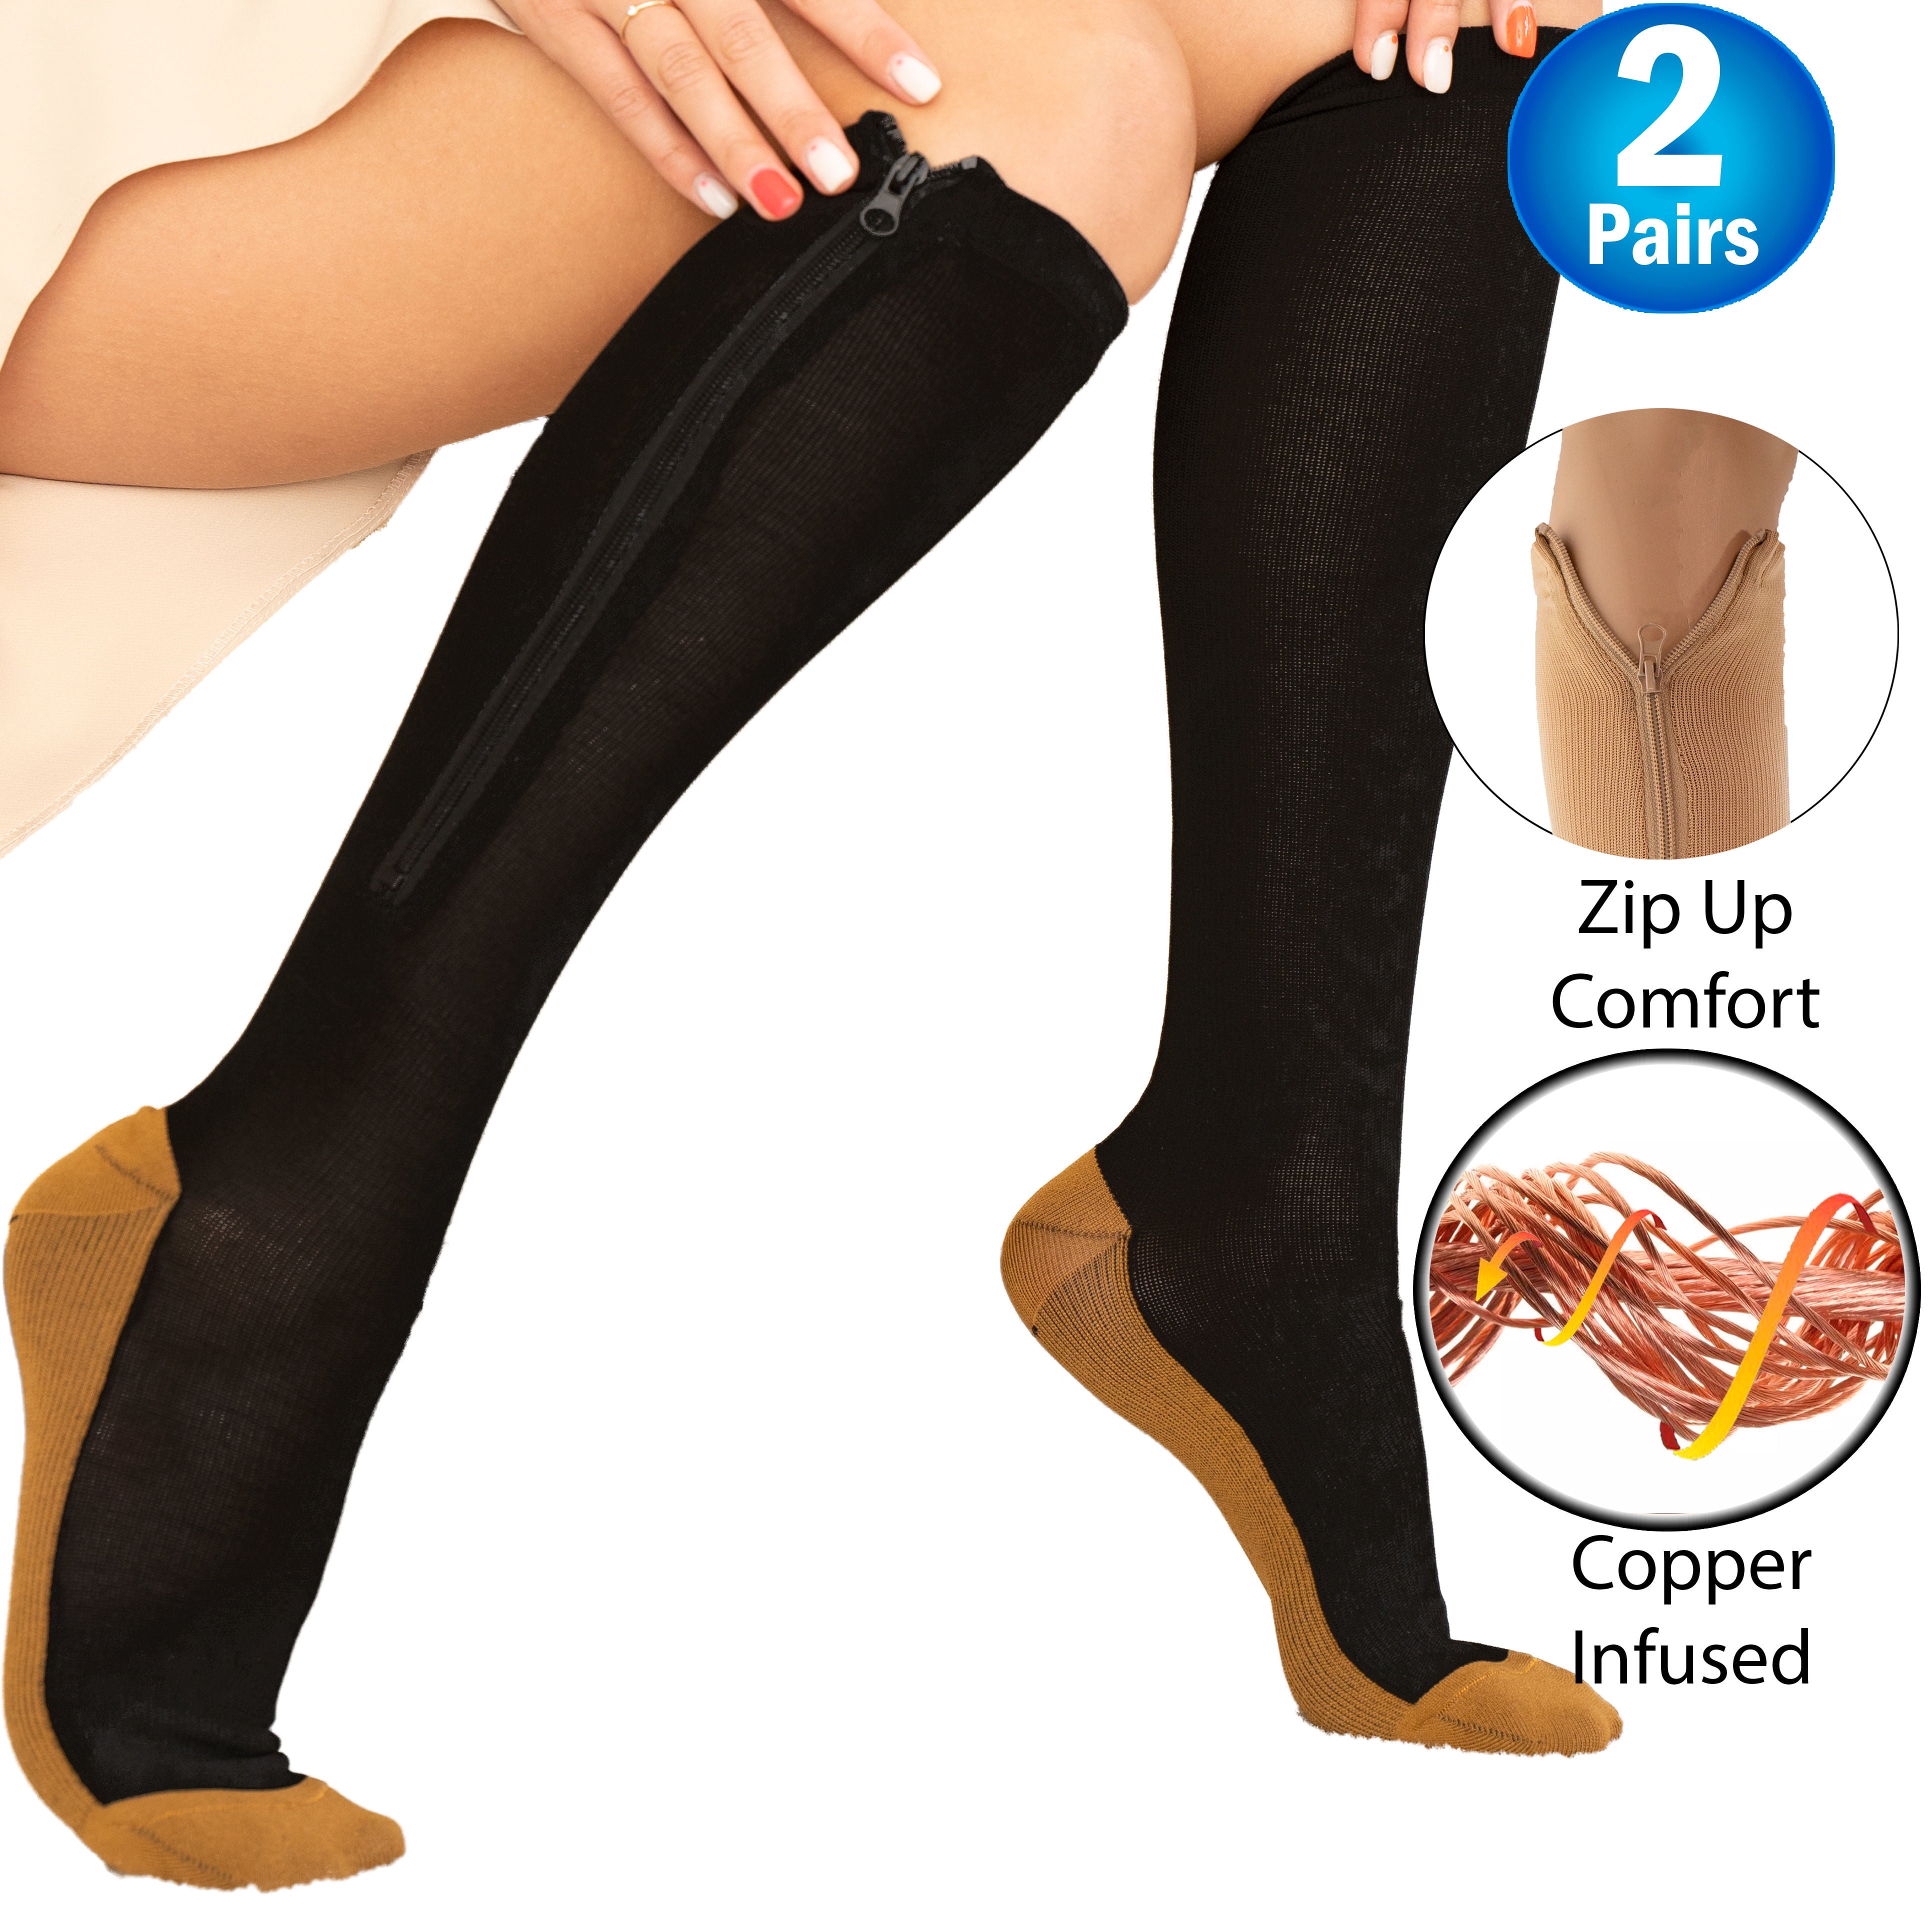 Copper Zipper Compression Socks w/ Closed Toe Knee High Support Stockings -  Soft, Breathable Compression Socks For Support, Reduce Swelling & Better